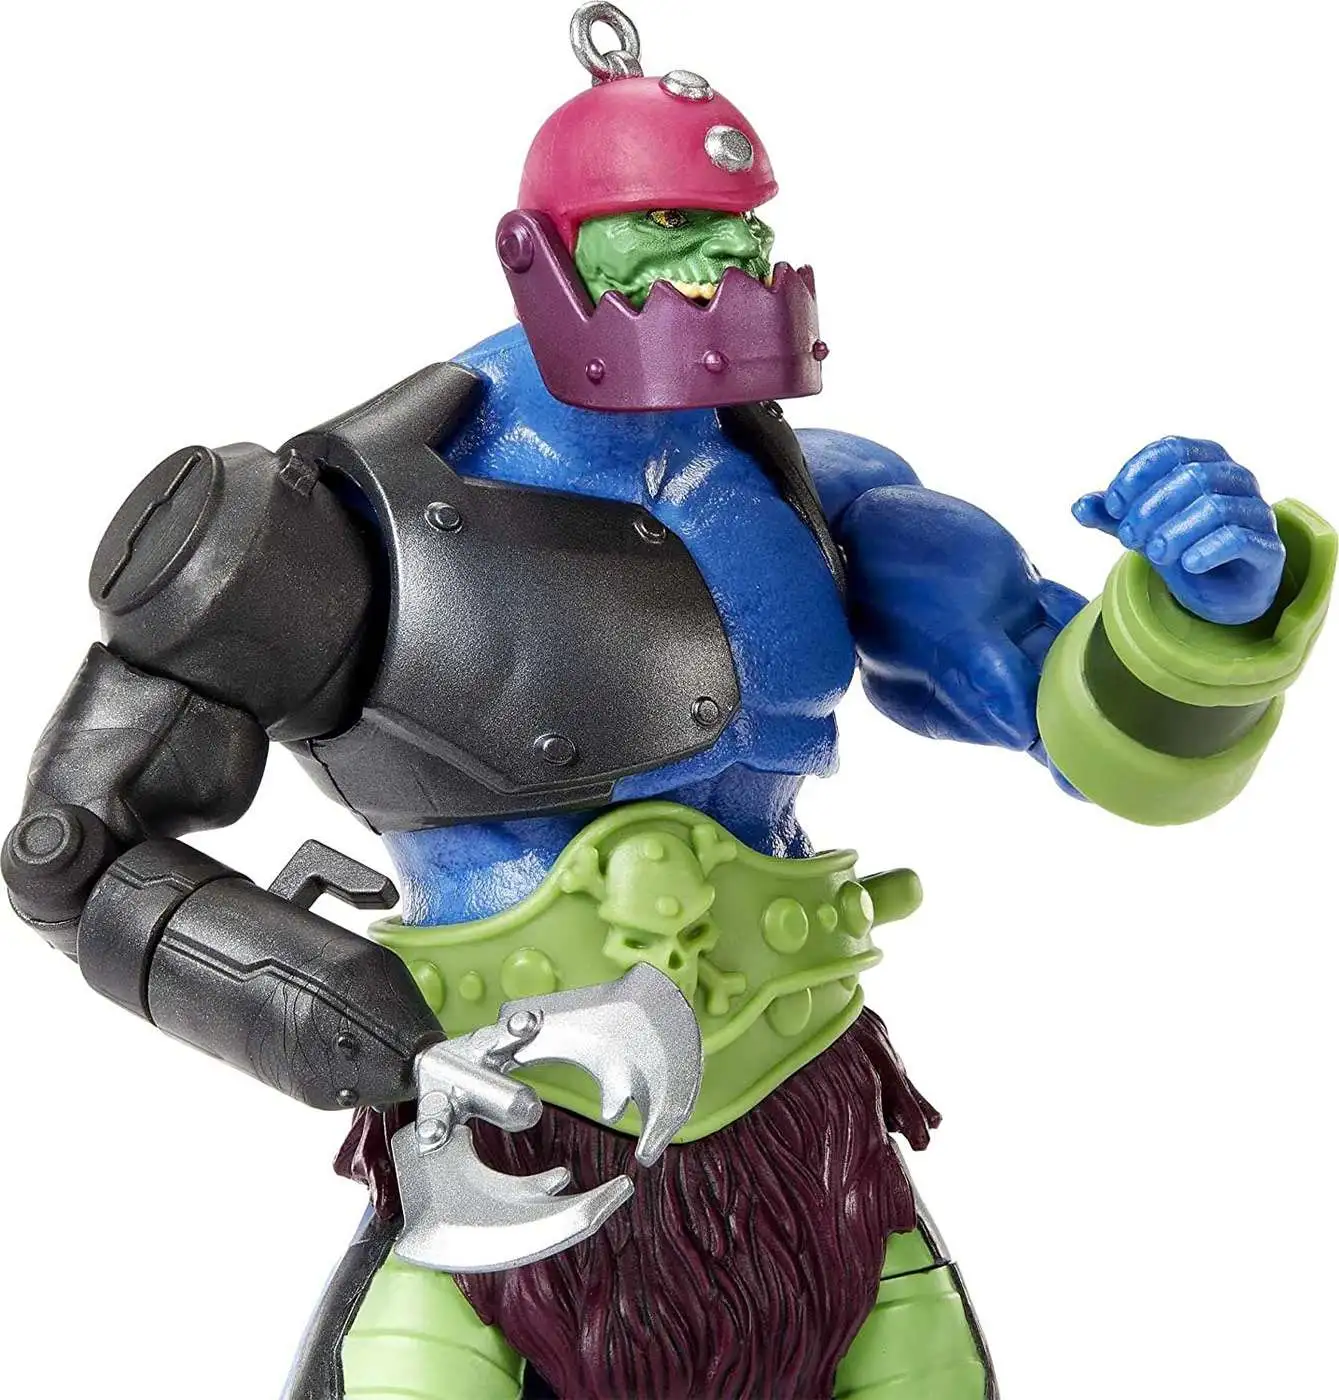 Mattel Masters of the Universe Trapjaw Action Figure 55626 for sale online 